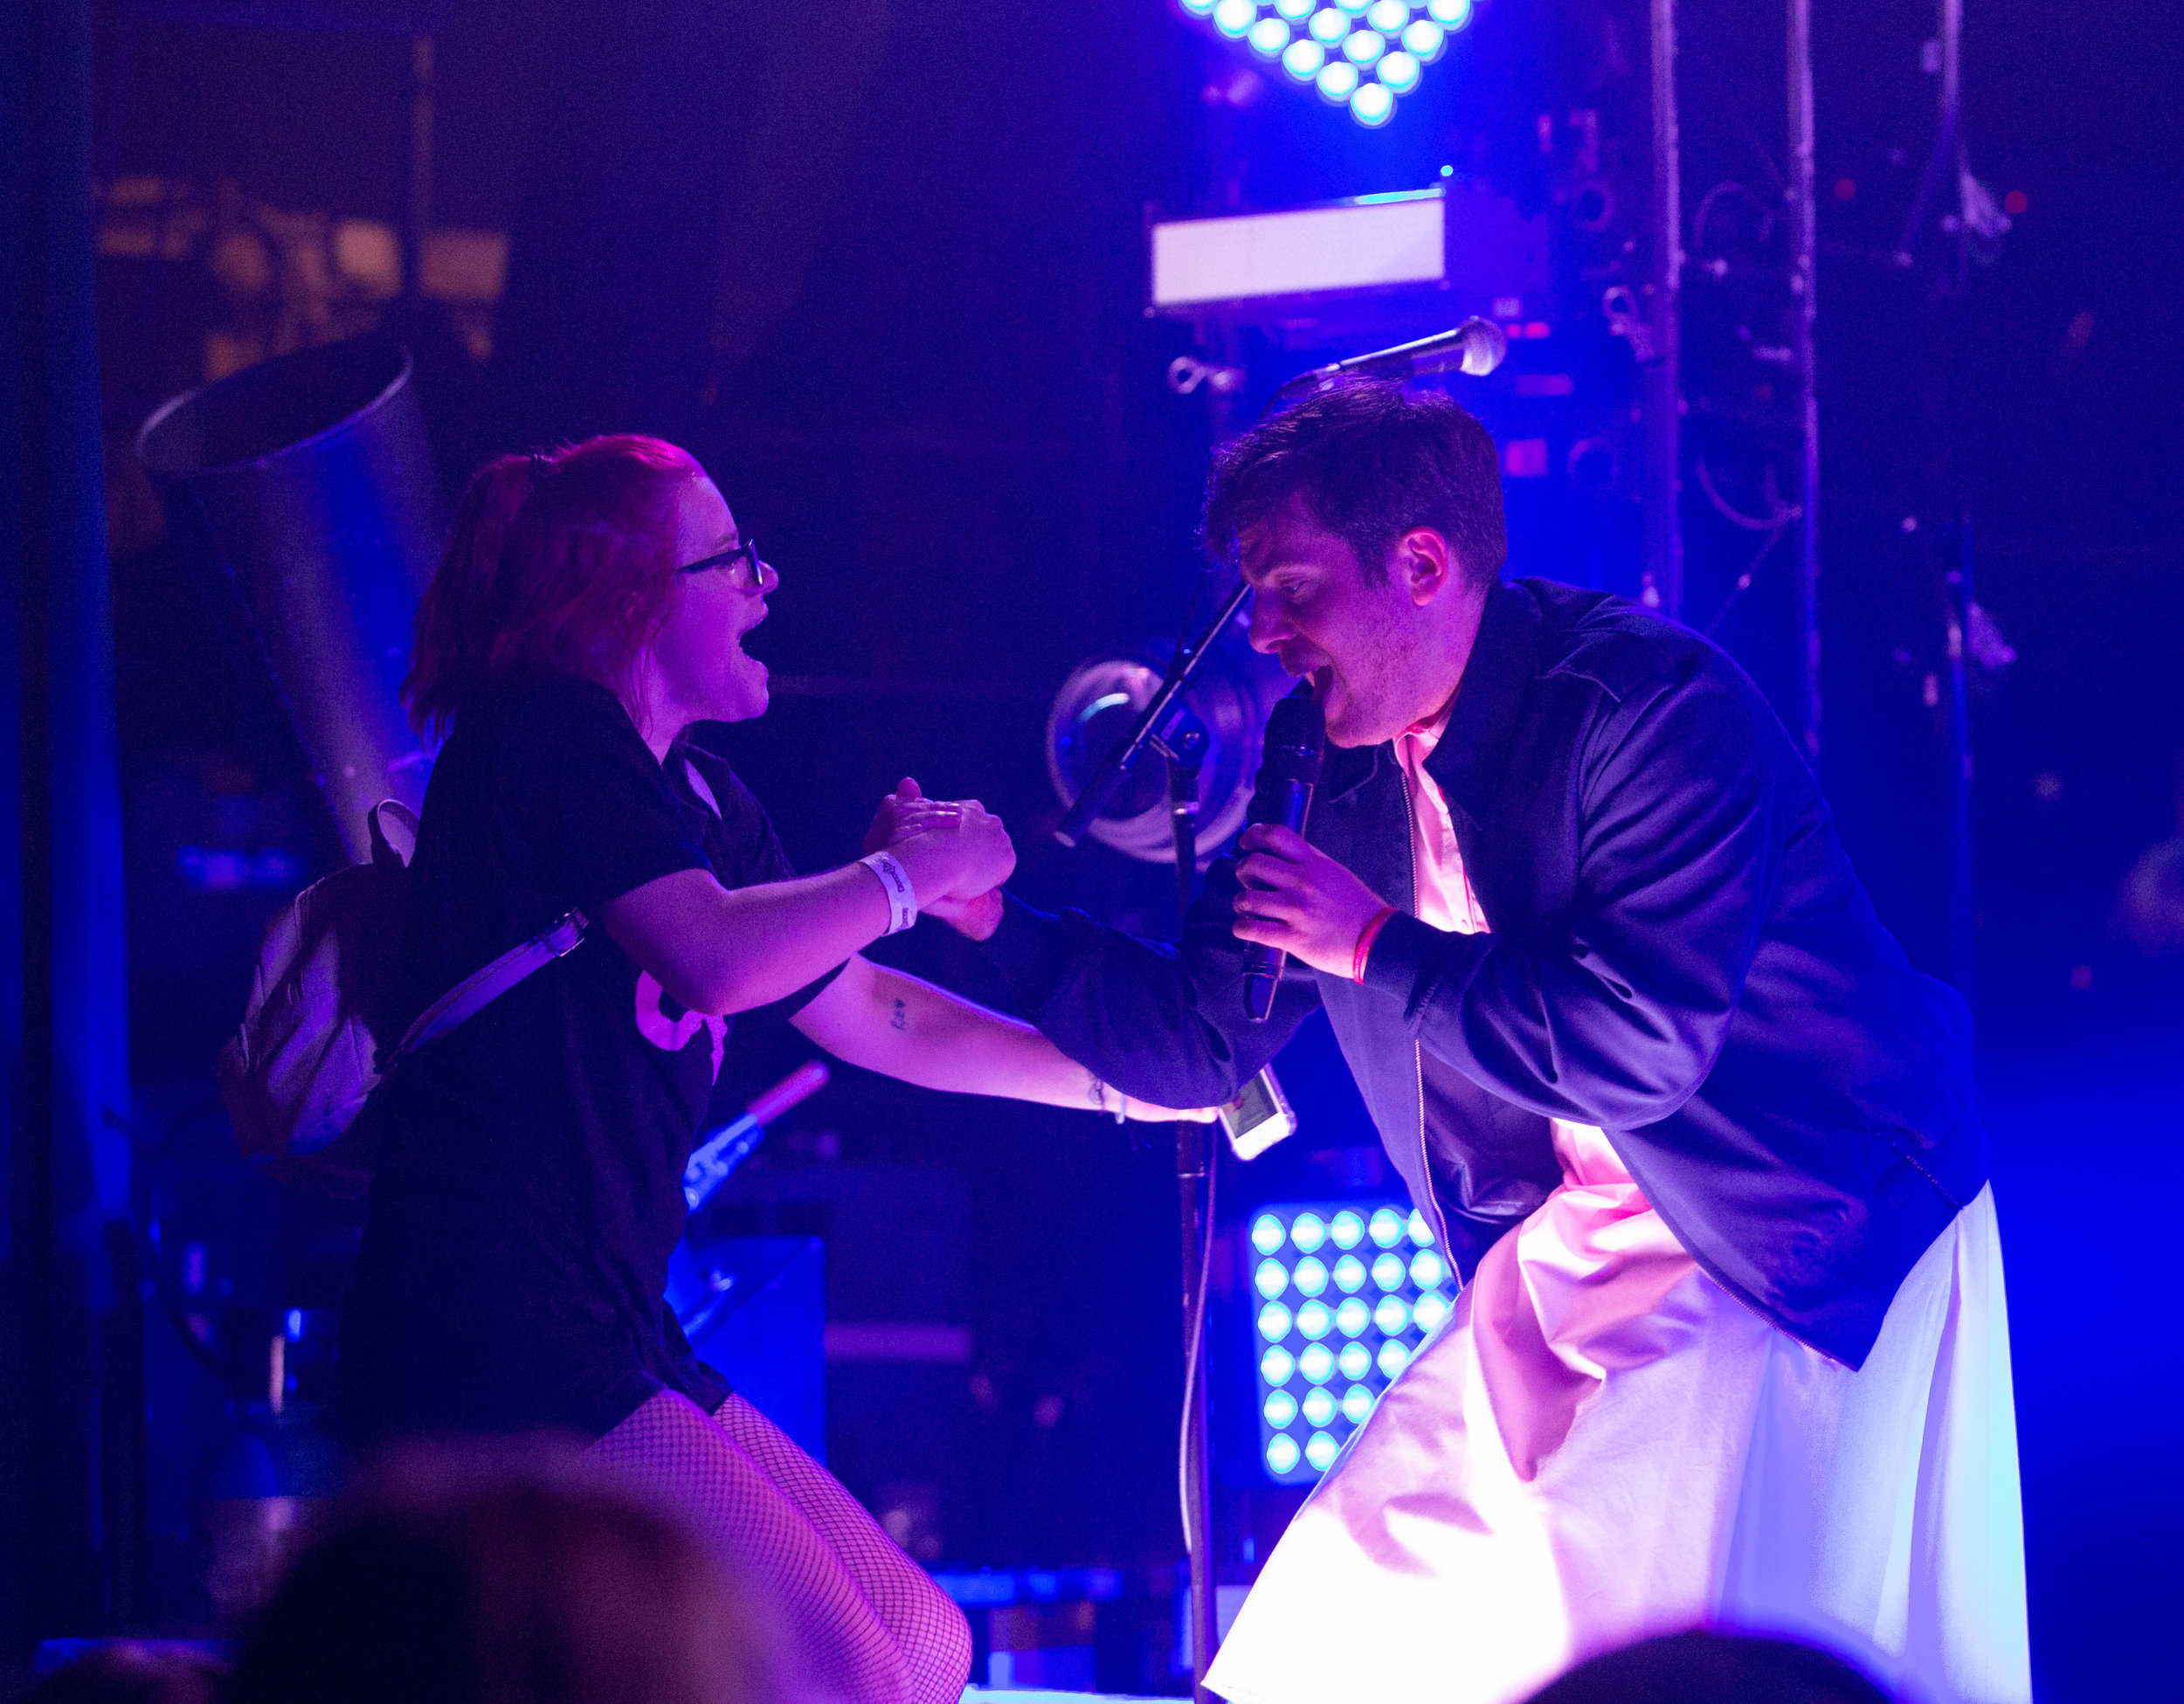  American rapper Hoodie Allen (Steven Adam Markowitz) helps a fan on stage after her phone was called by the rapper dressed as the female character "11" from the Netflix show "Stranger Things". The second season of the show released Friday, October 2